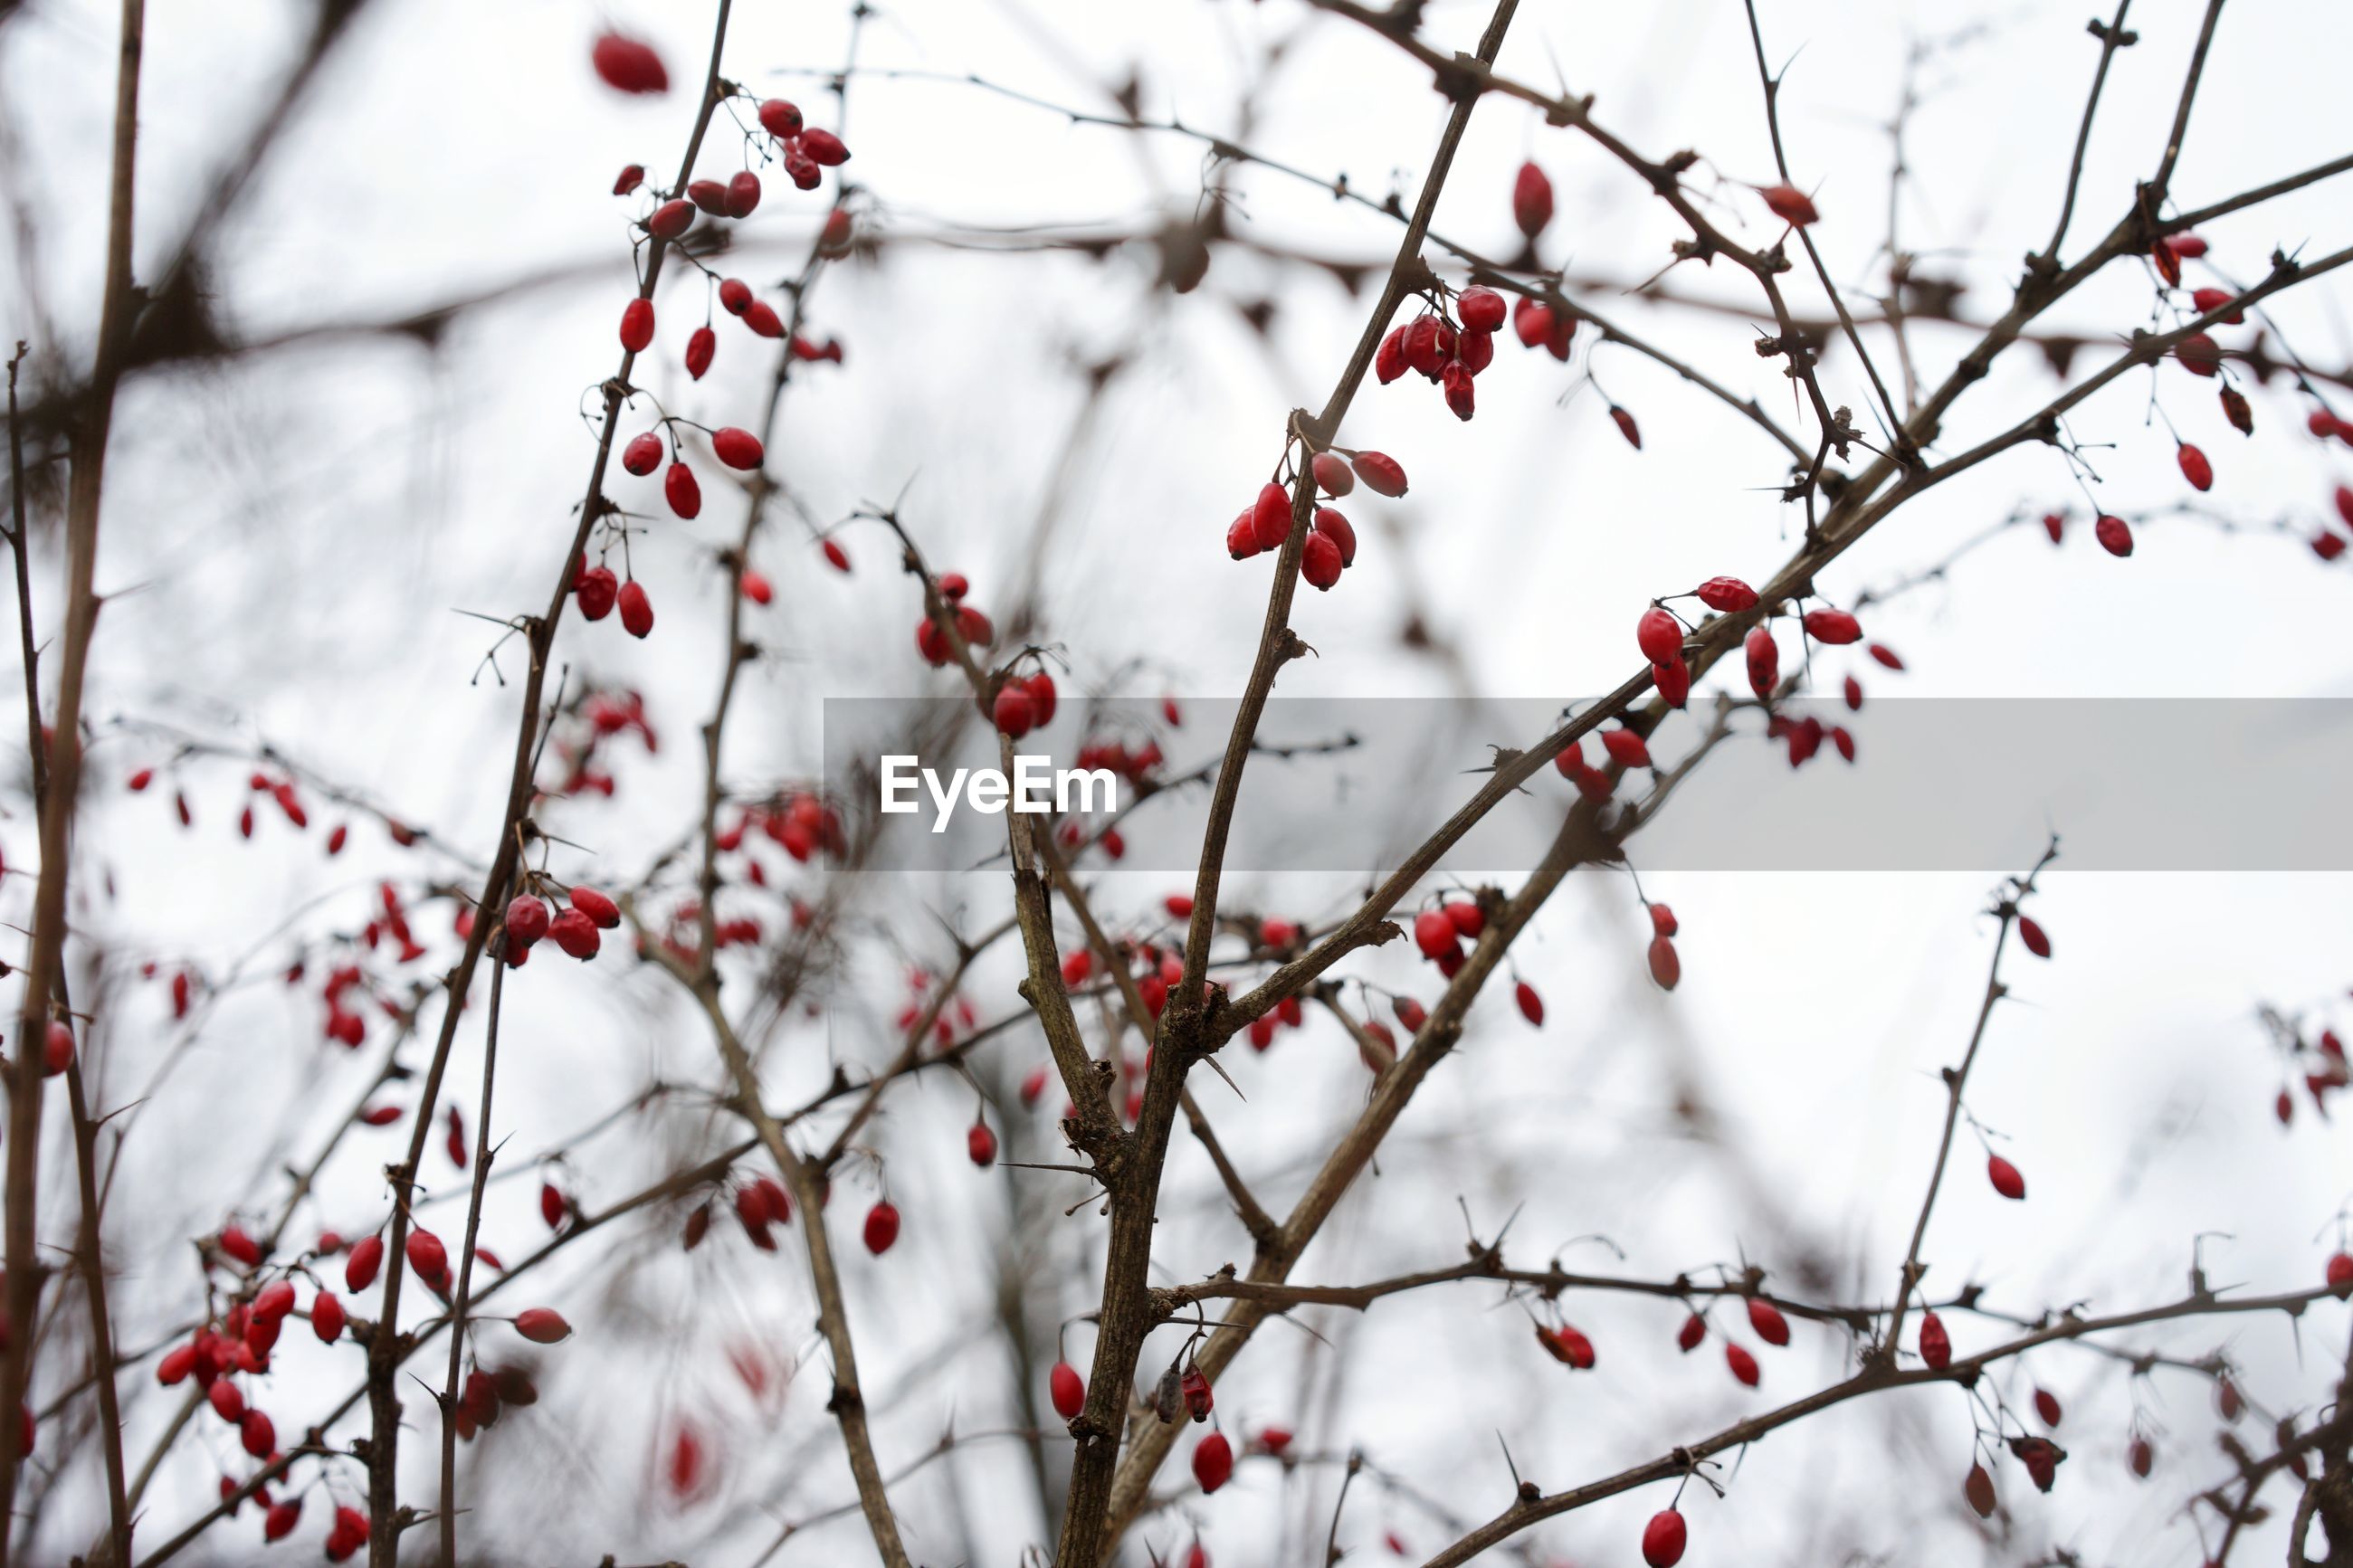 Red berries on tree branch during winter | ID: 157308009